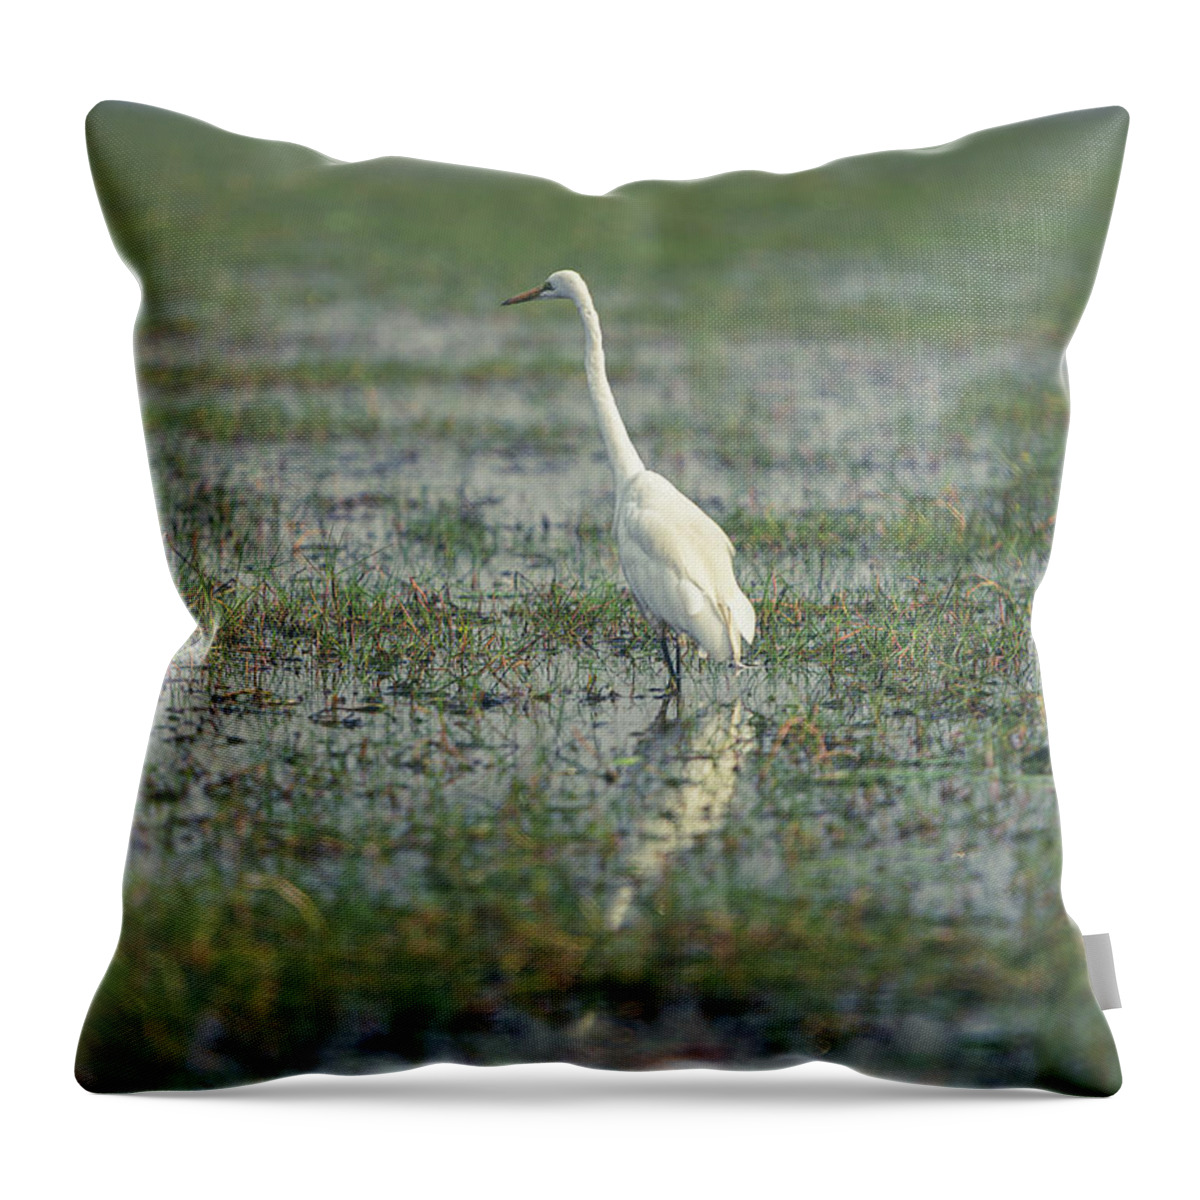 #look # Eyes #birds #feathers #eyes #color #colour #alone #white #swamp Throw Pillow featuring the photograph Standing Alone by Dheeraj Mutha